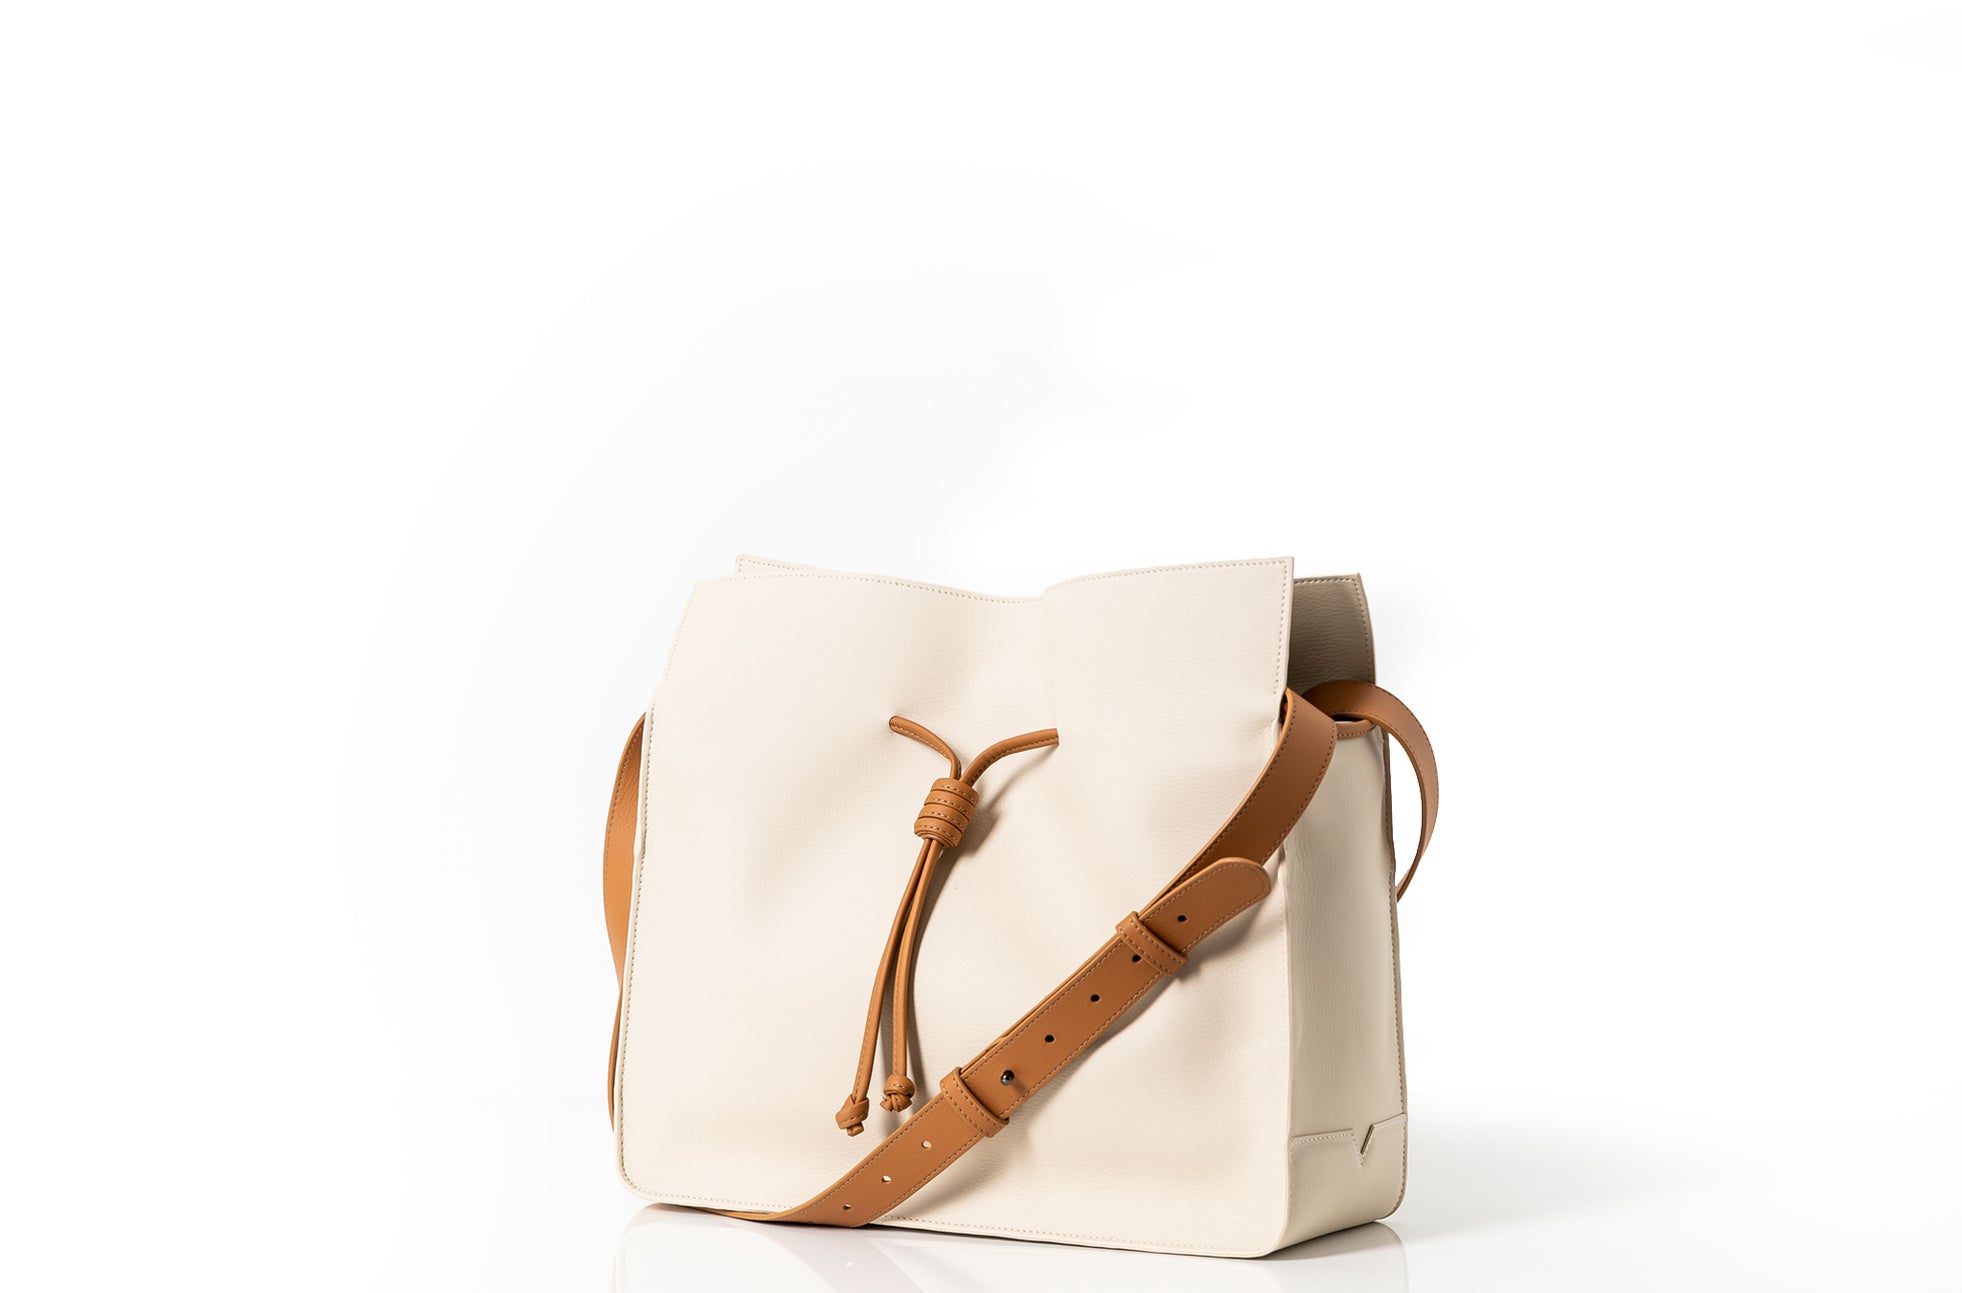 The Medium Shopper in Technik-Leather in Oat and Caramel image 4